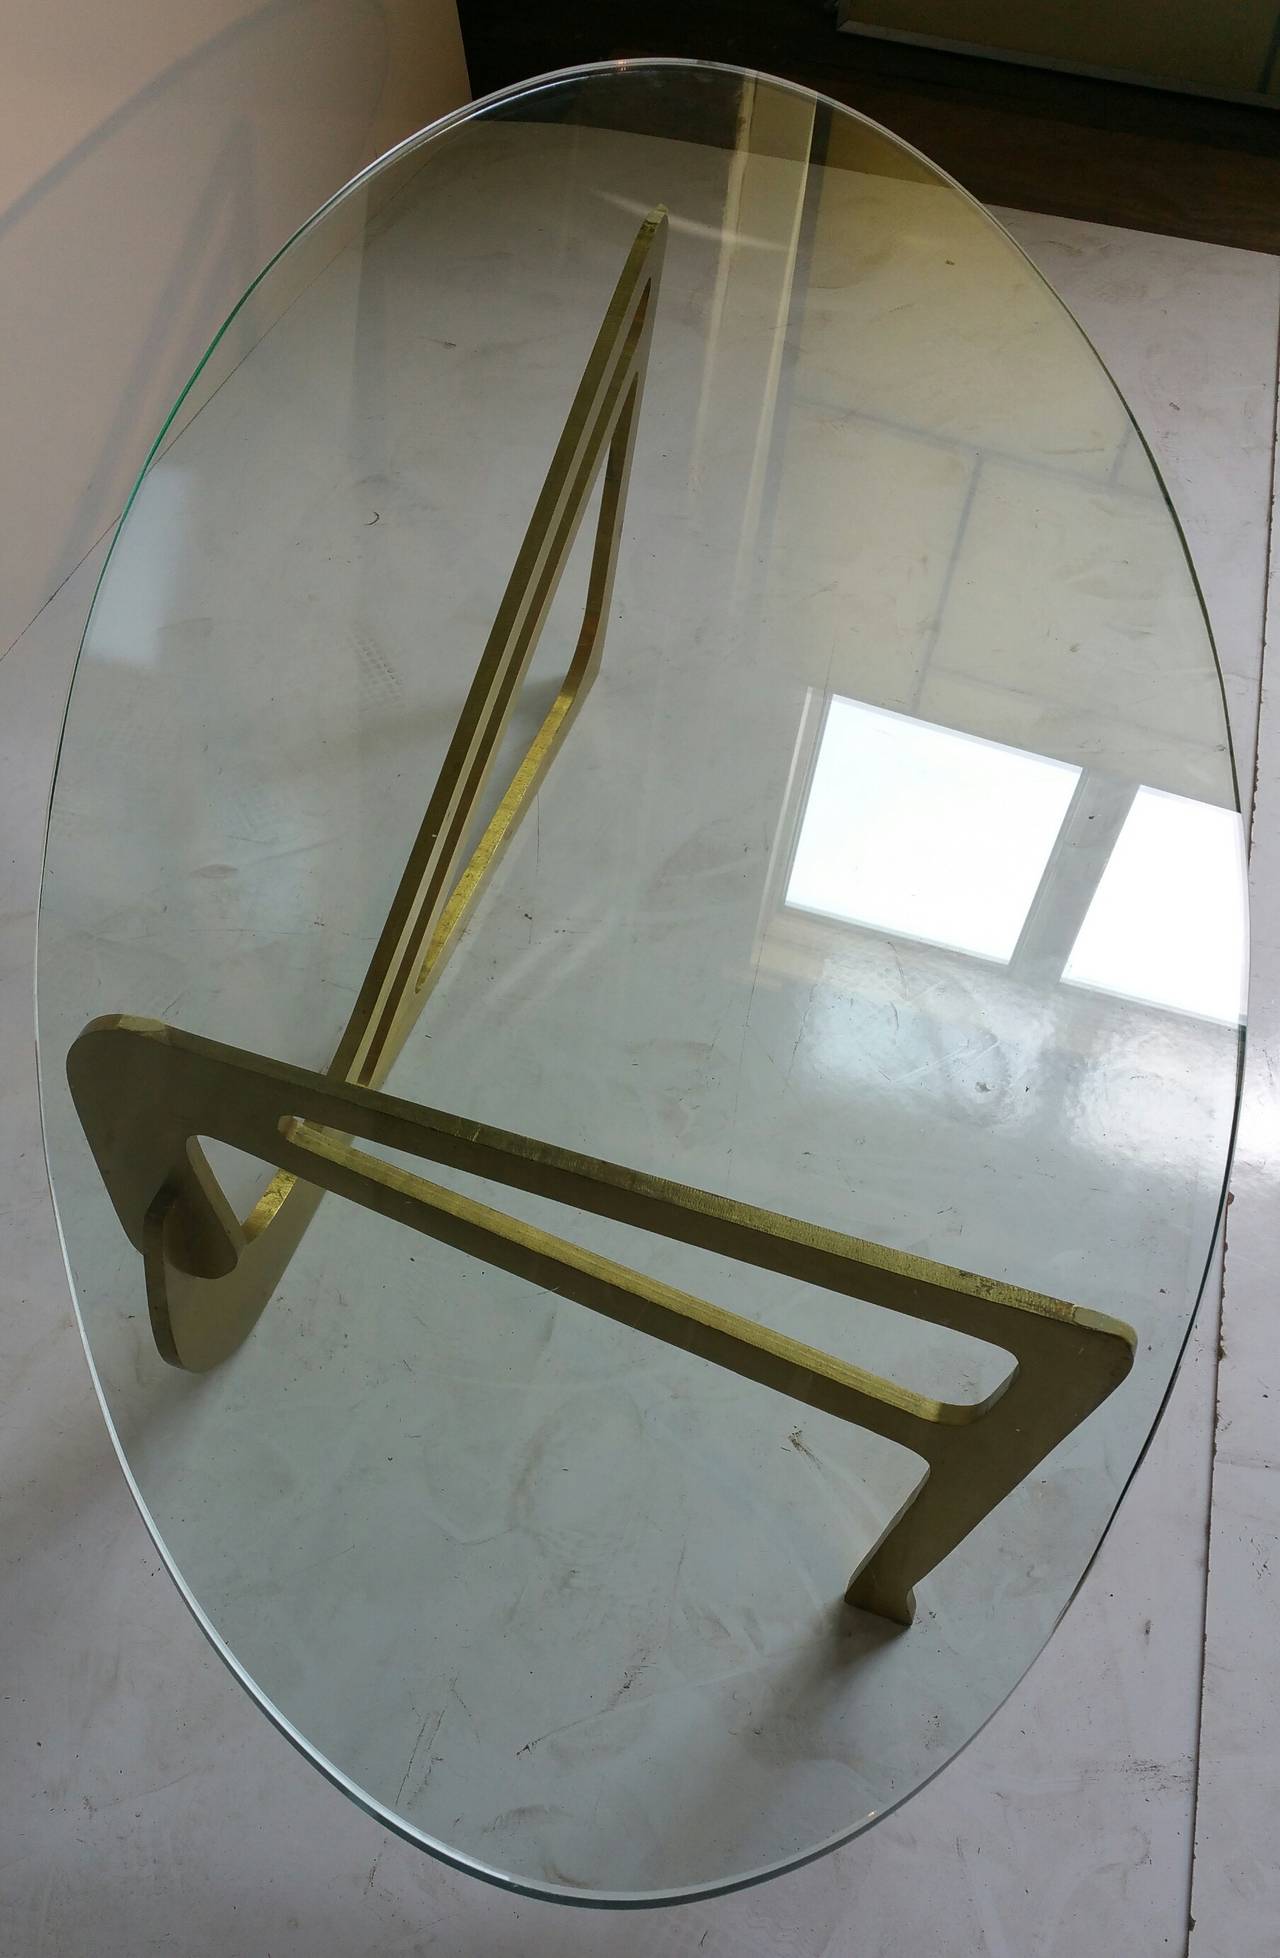 Solid brass sculptural base the brass version of  the famed organic Noguchi coffee table. Original thick oval glass